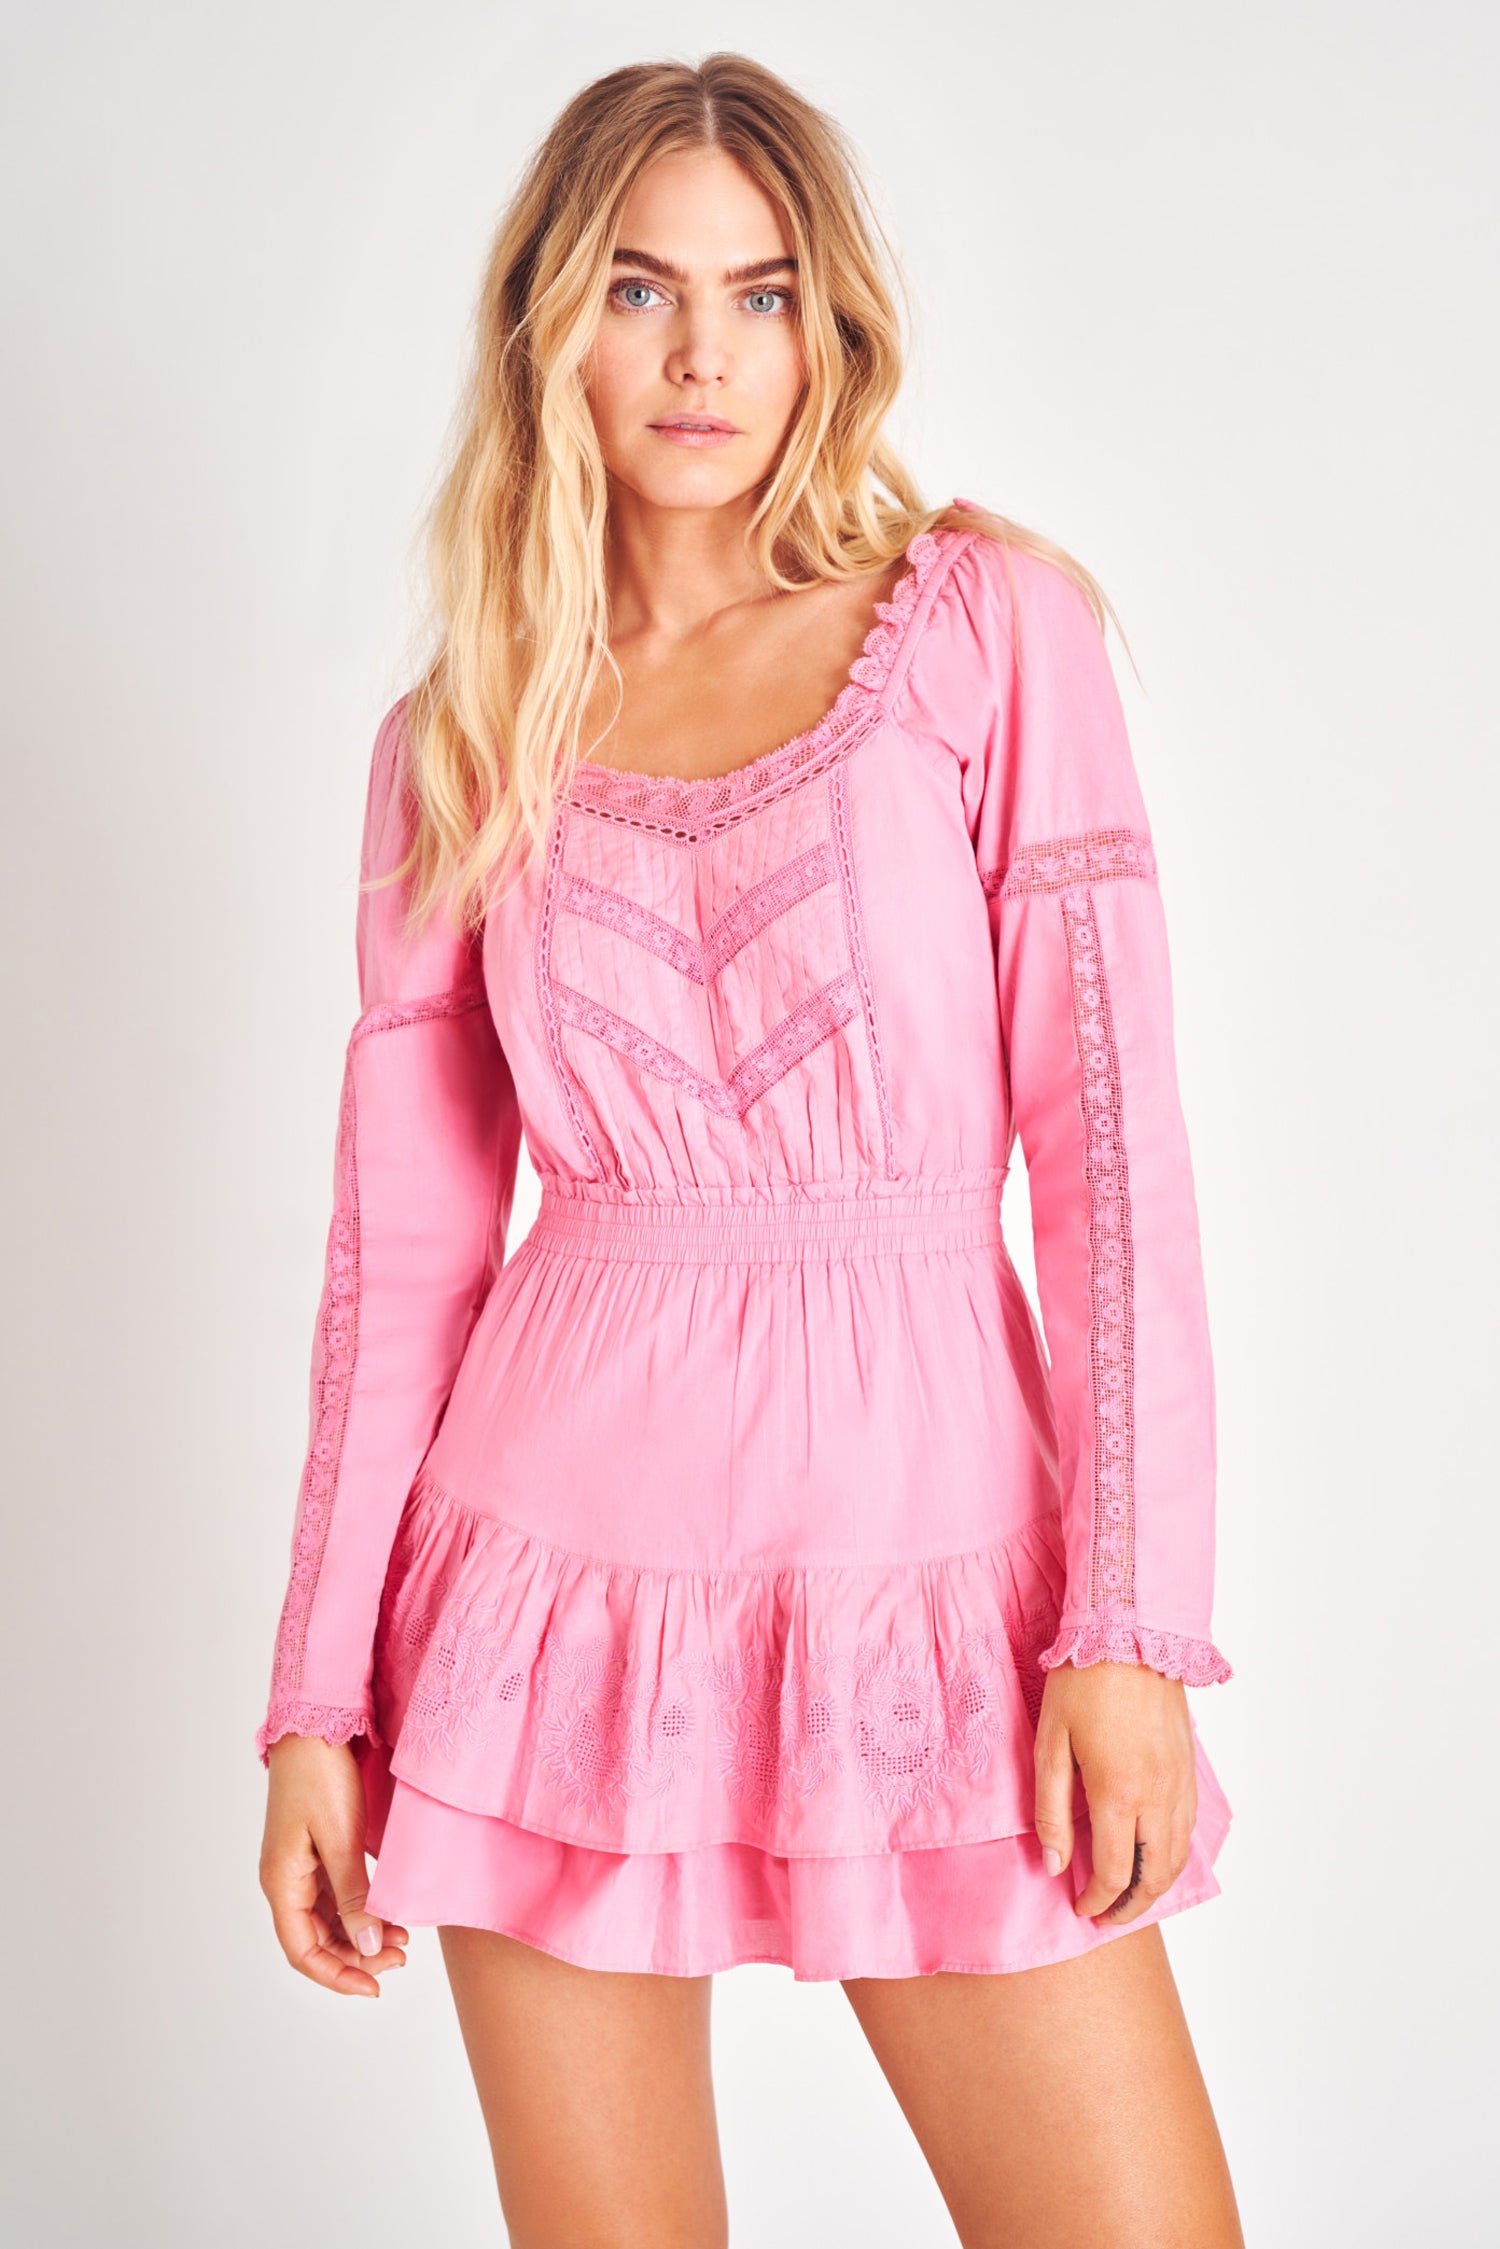 Pink long sleeve ruffle mini dress with lace detailing.